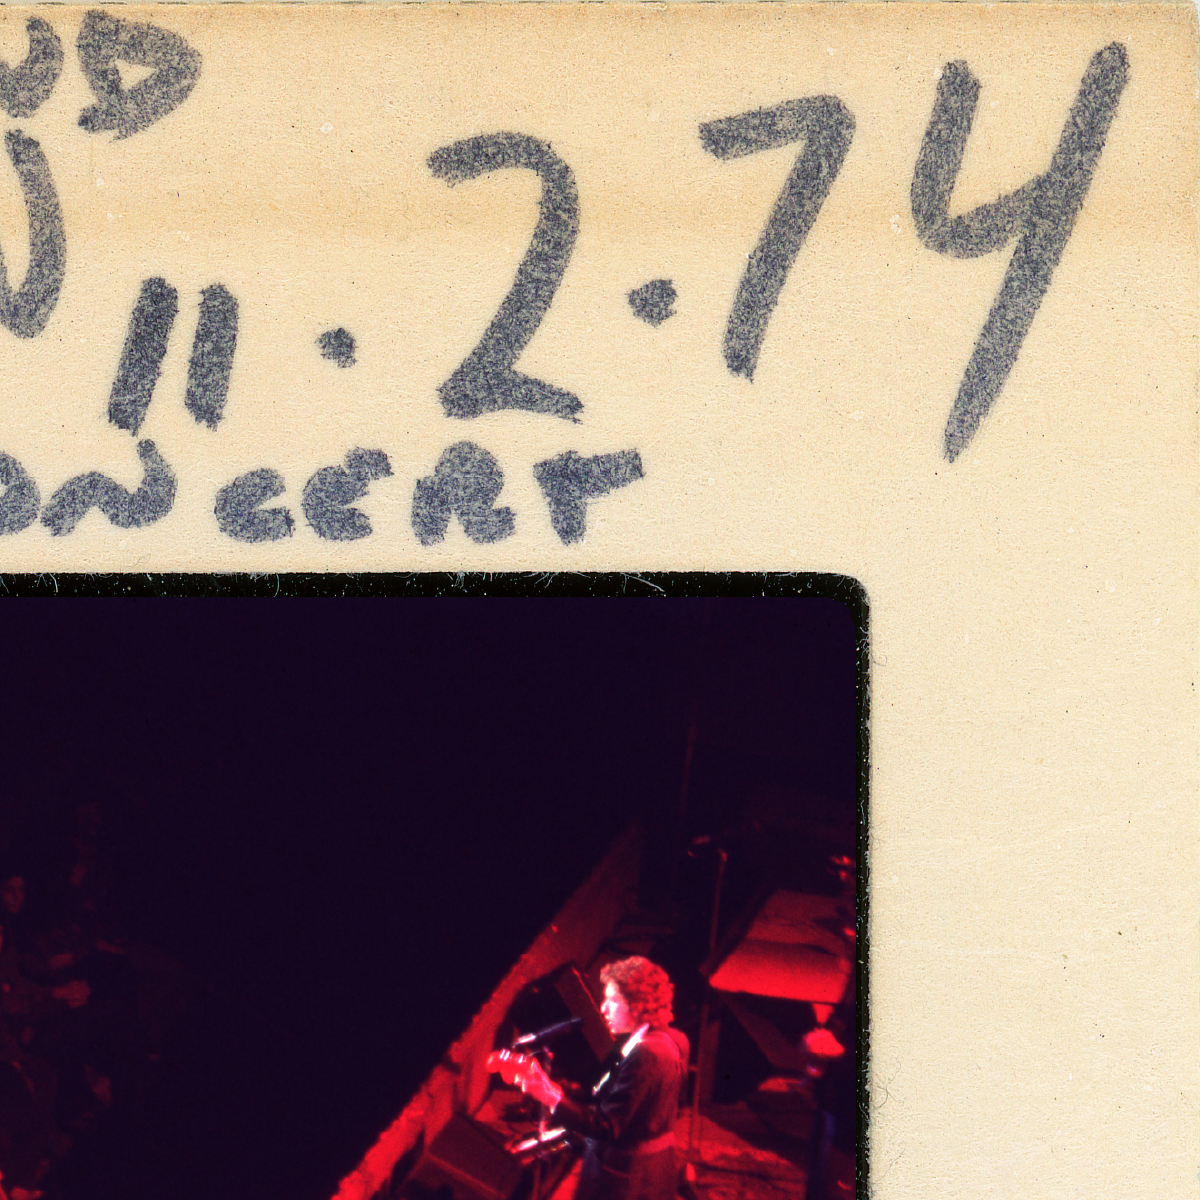 bob dylan and the band, live at the oakland coliseum, february 11, 1974 - 6 x 6 inch - limited edition prints